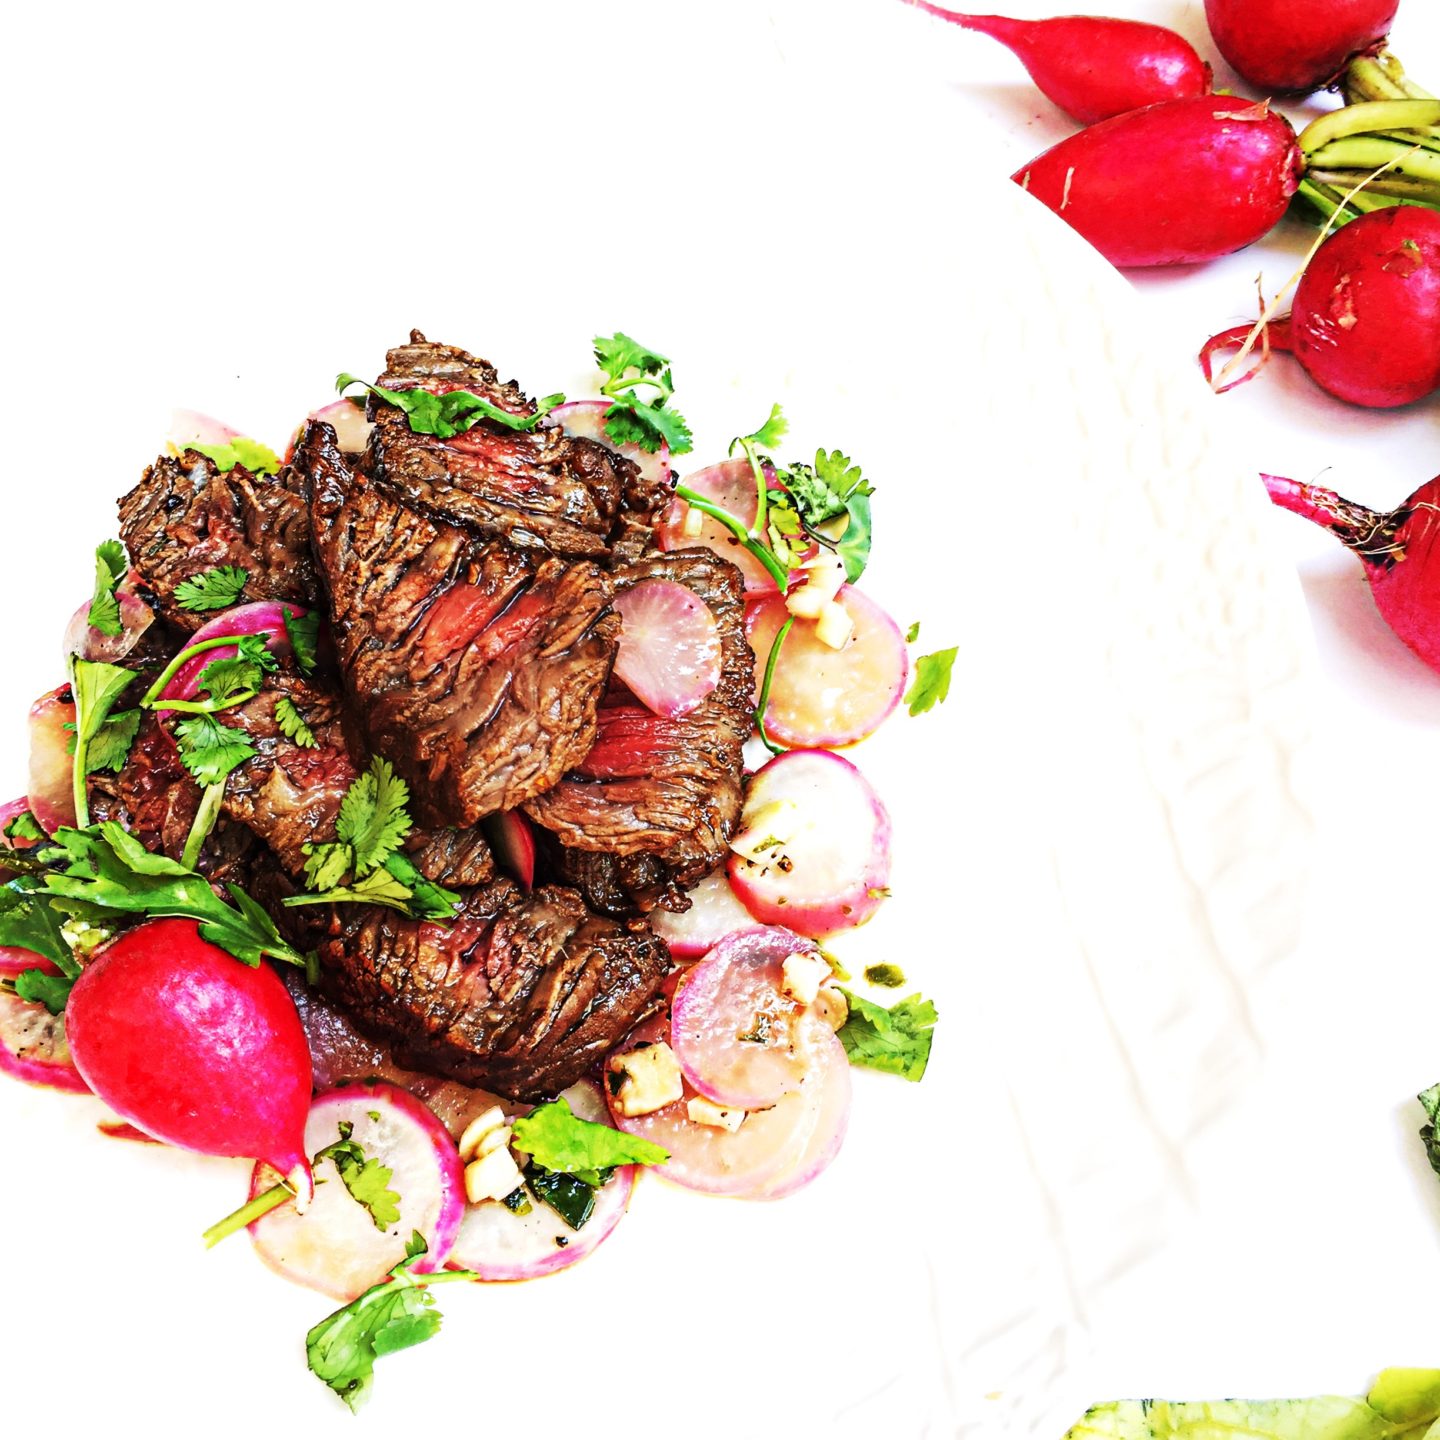 Marinated Steak over Grilled Radishes and Cilantro